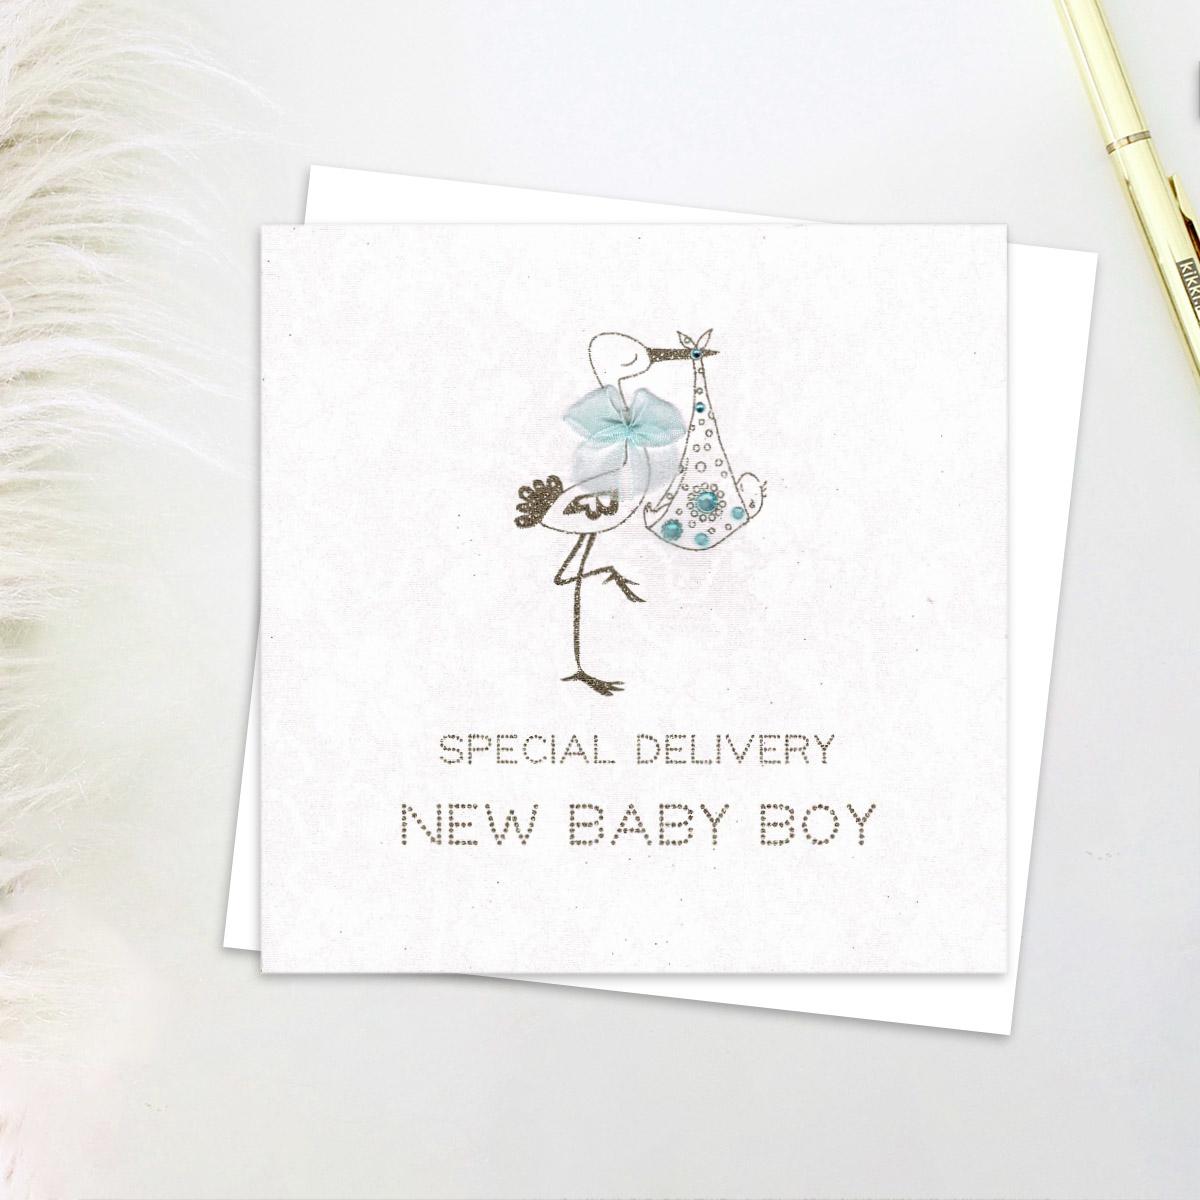 Special Delivery New Baby Boy Card Front Image